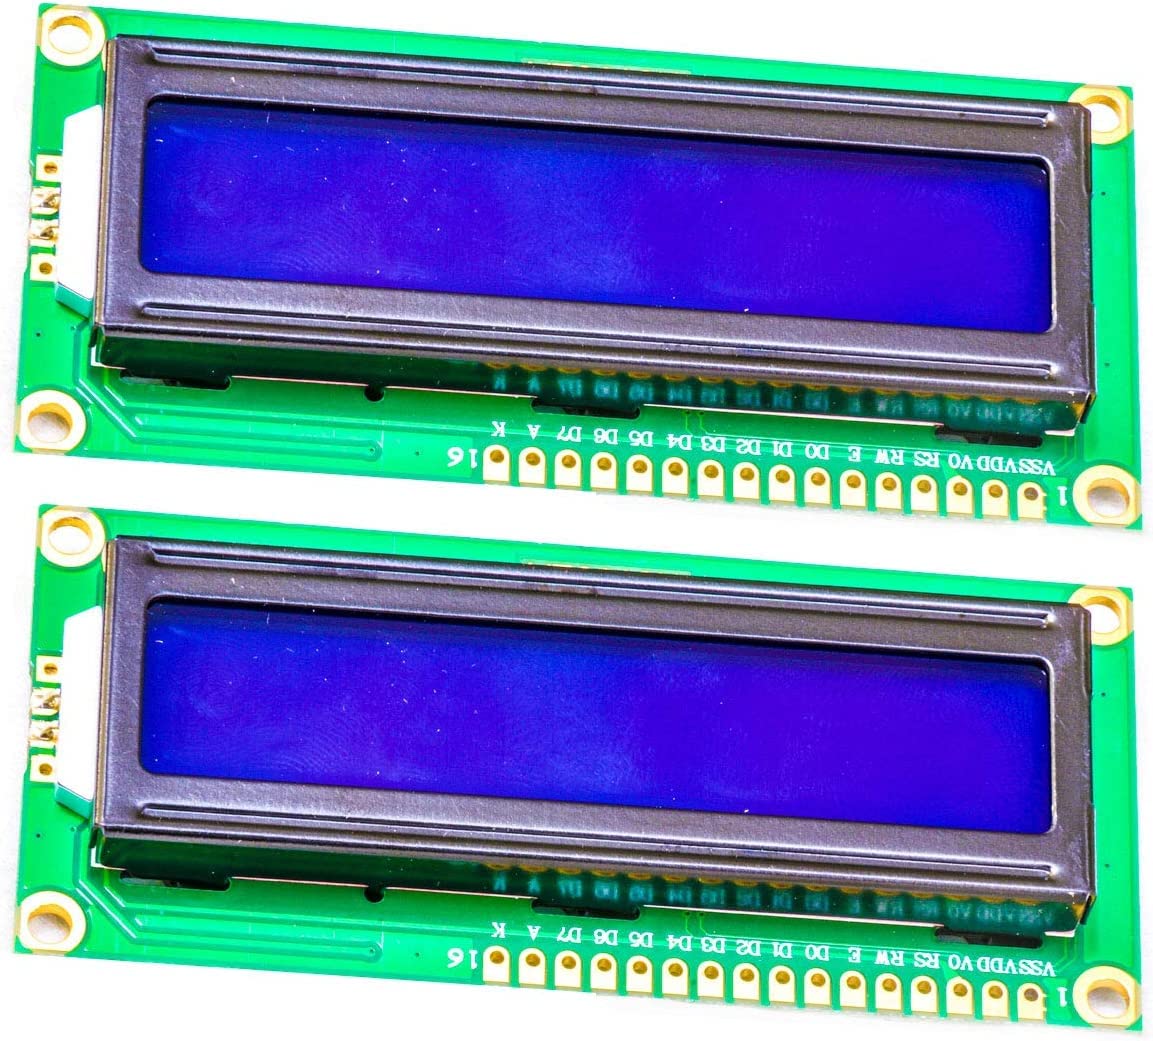 Book Cover LGDehome 2 Pack HD44780 1602 LCD Display Module DC 5V 16x2 Character Blue Blacklight